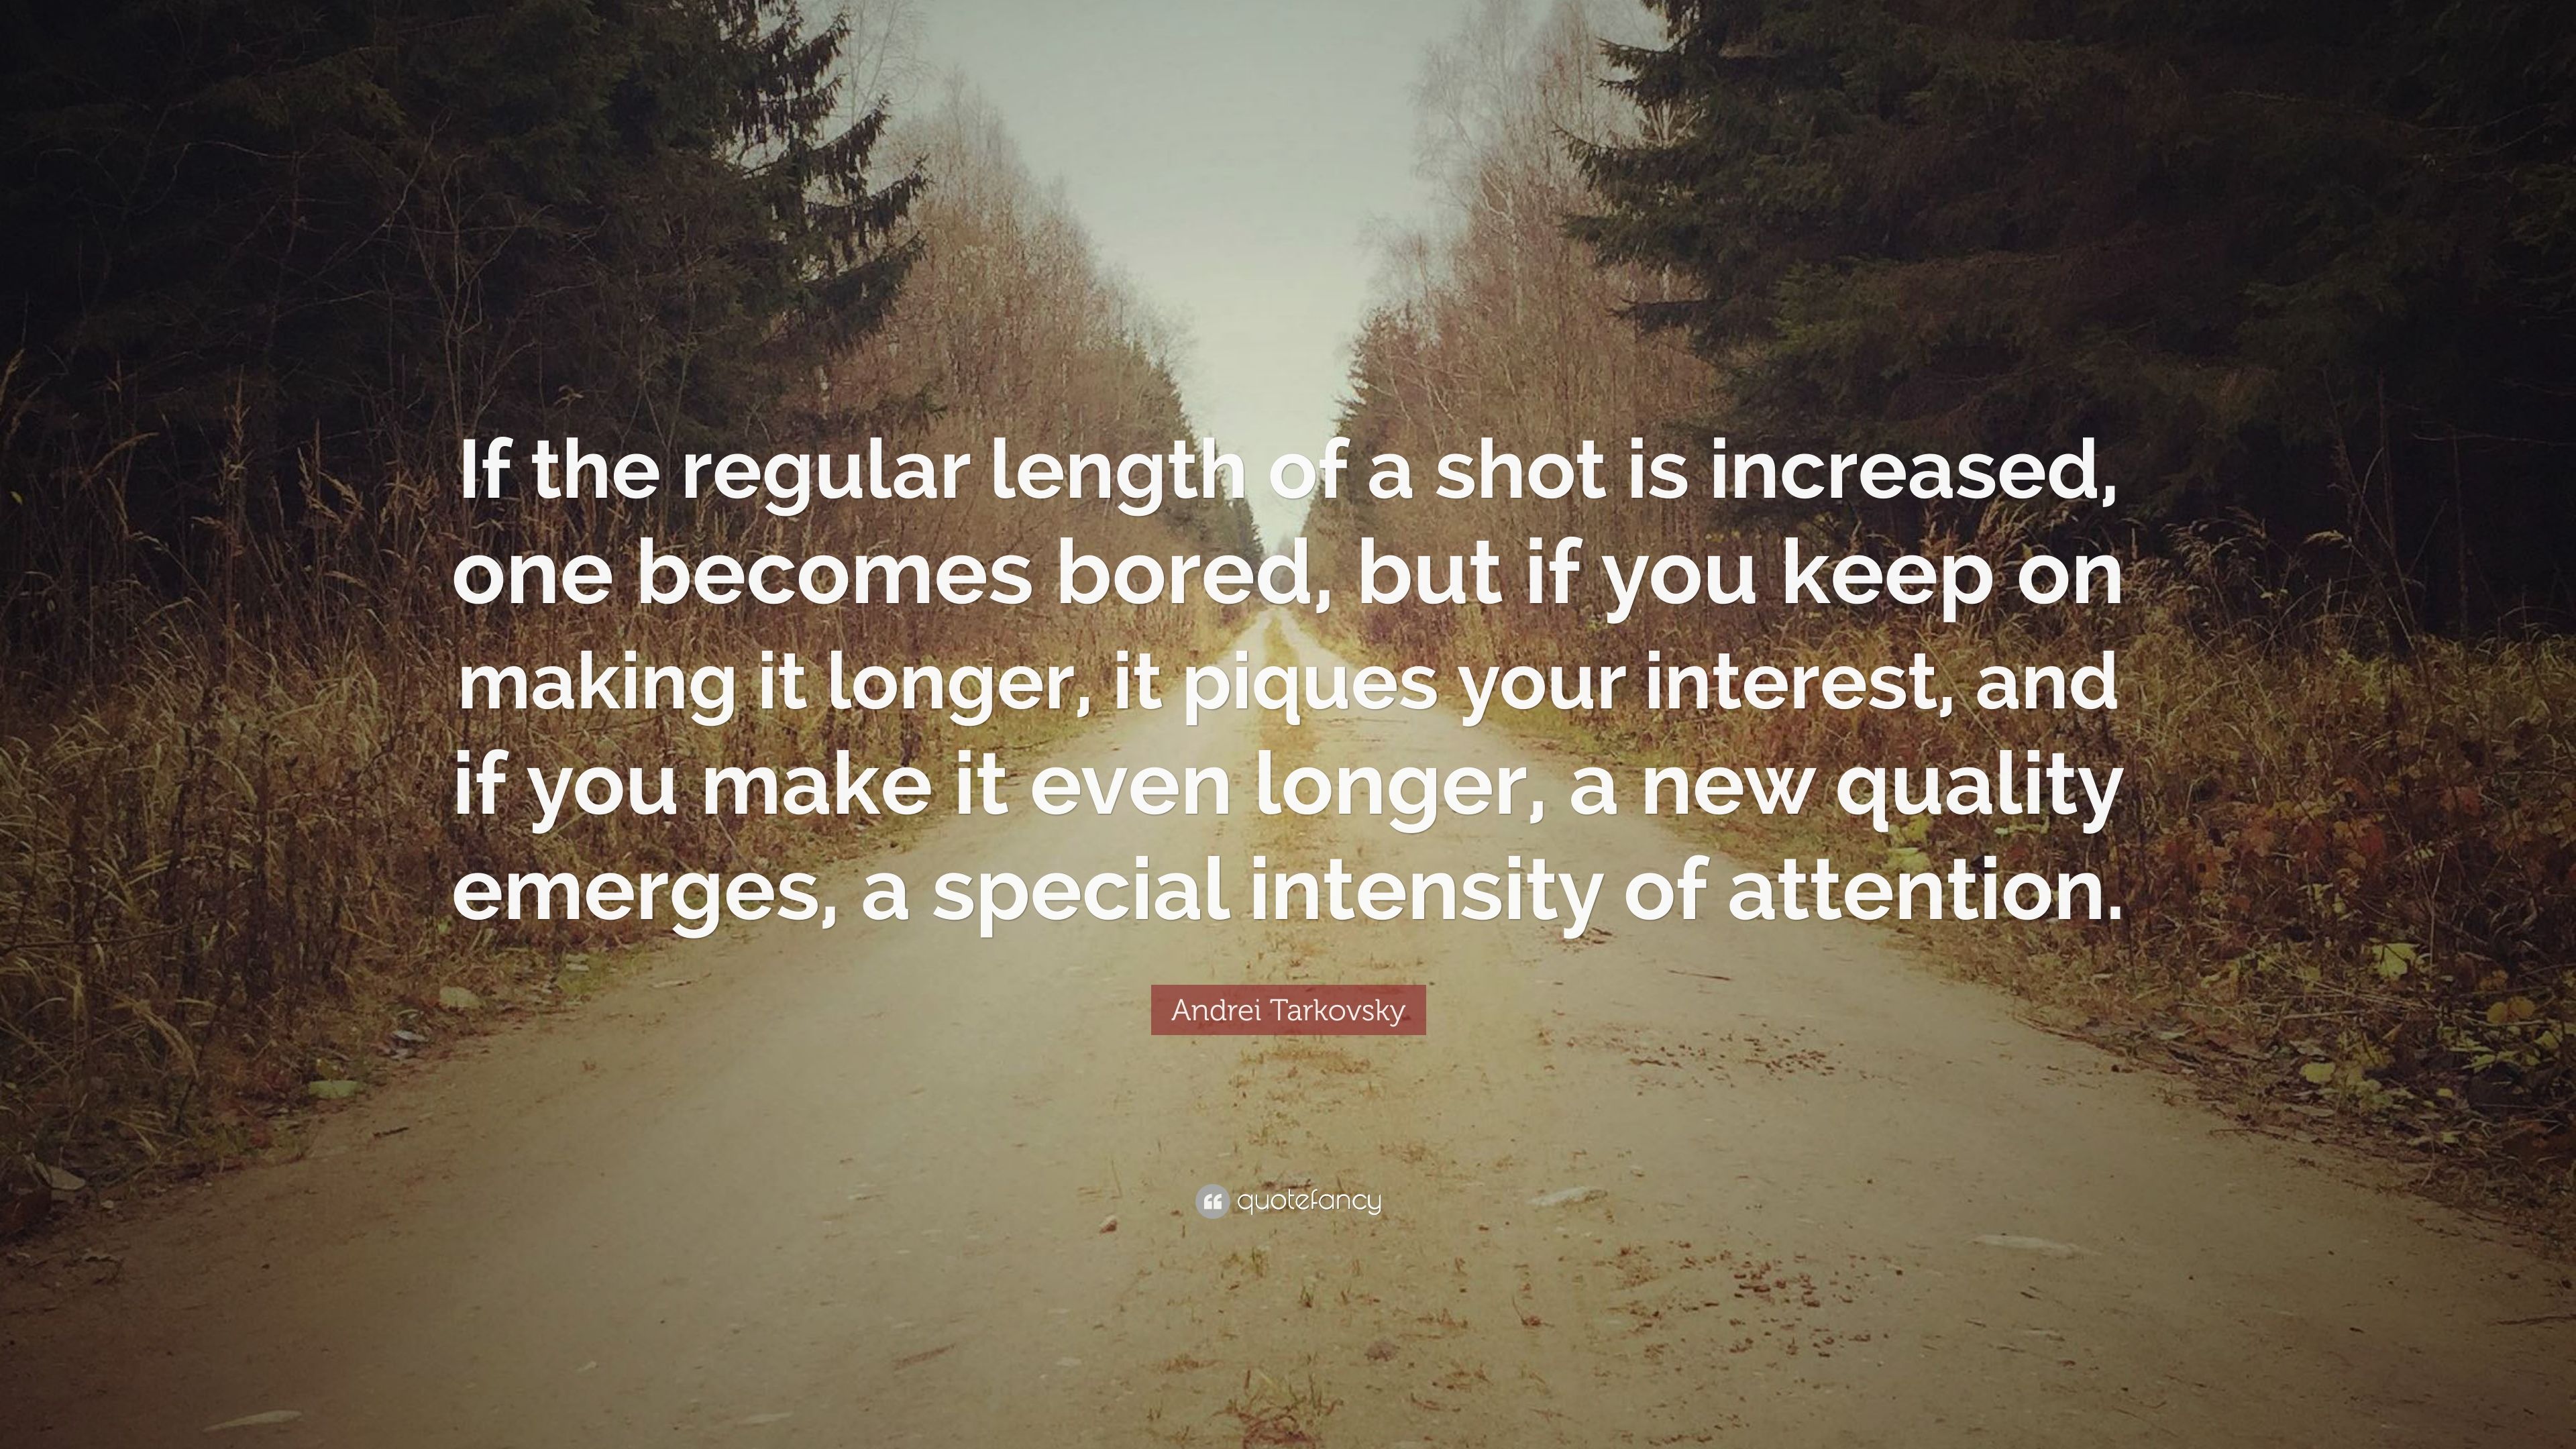 Andrei Tarkovsky Quote: “If the regular length of a shot is